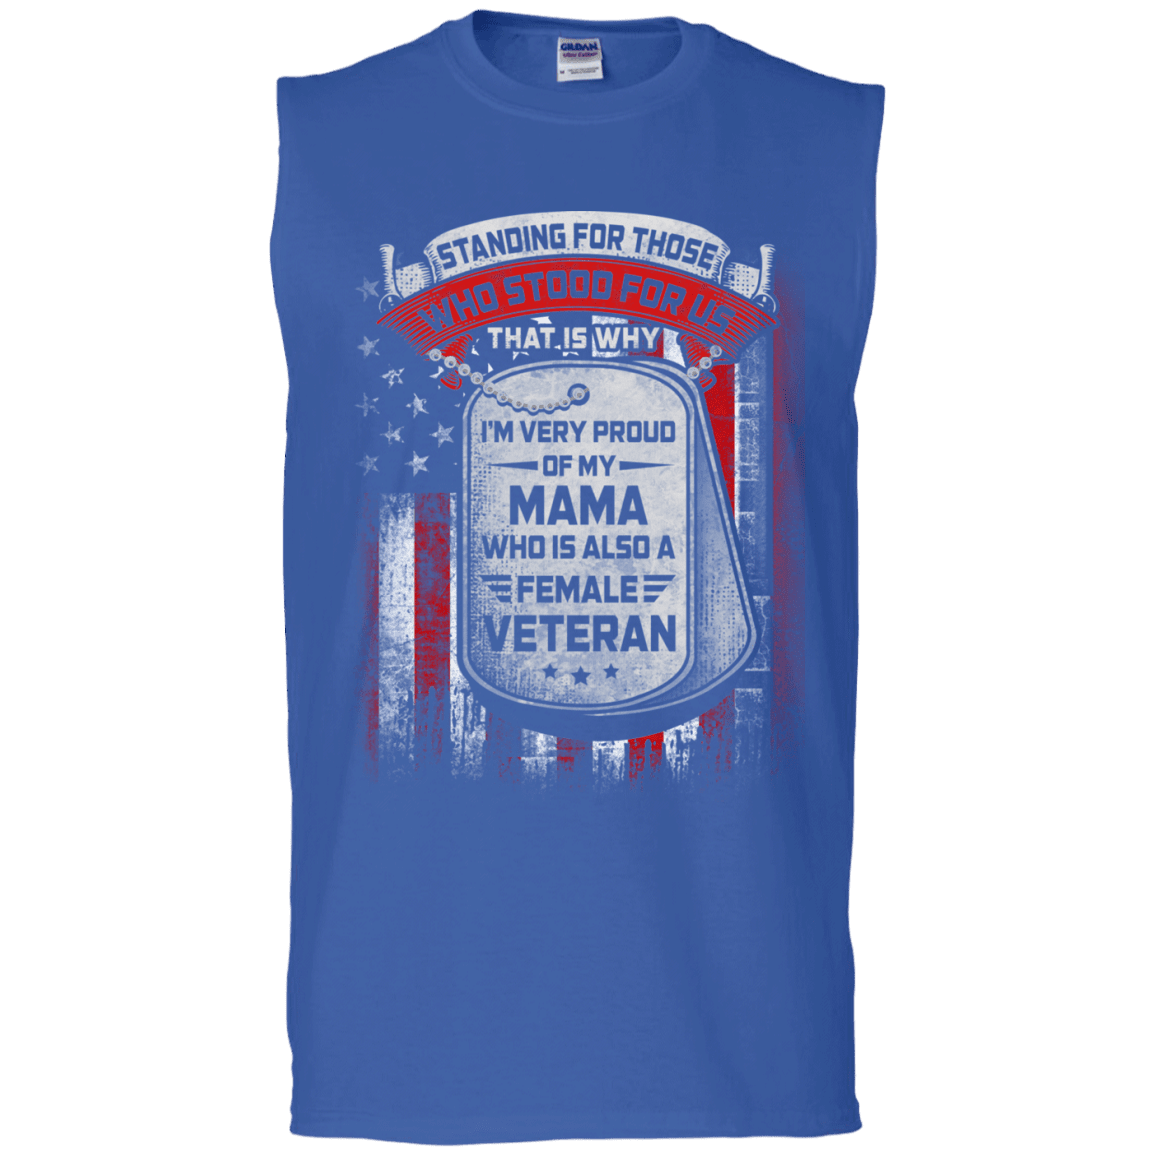 Military T-Shirt "Standing For Those Who Stood For Us" Front-TShirt-General-Veterans Nation